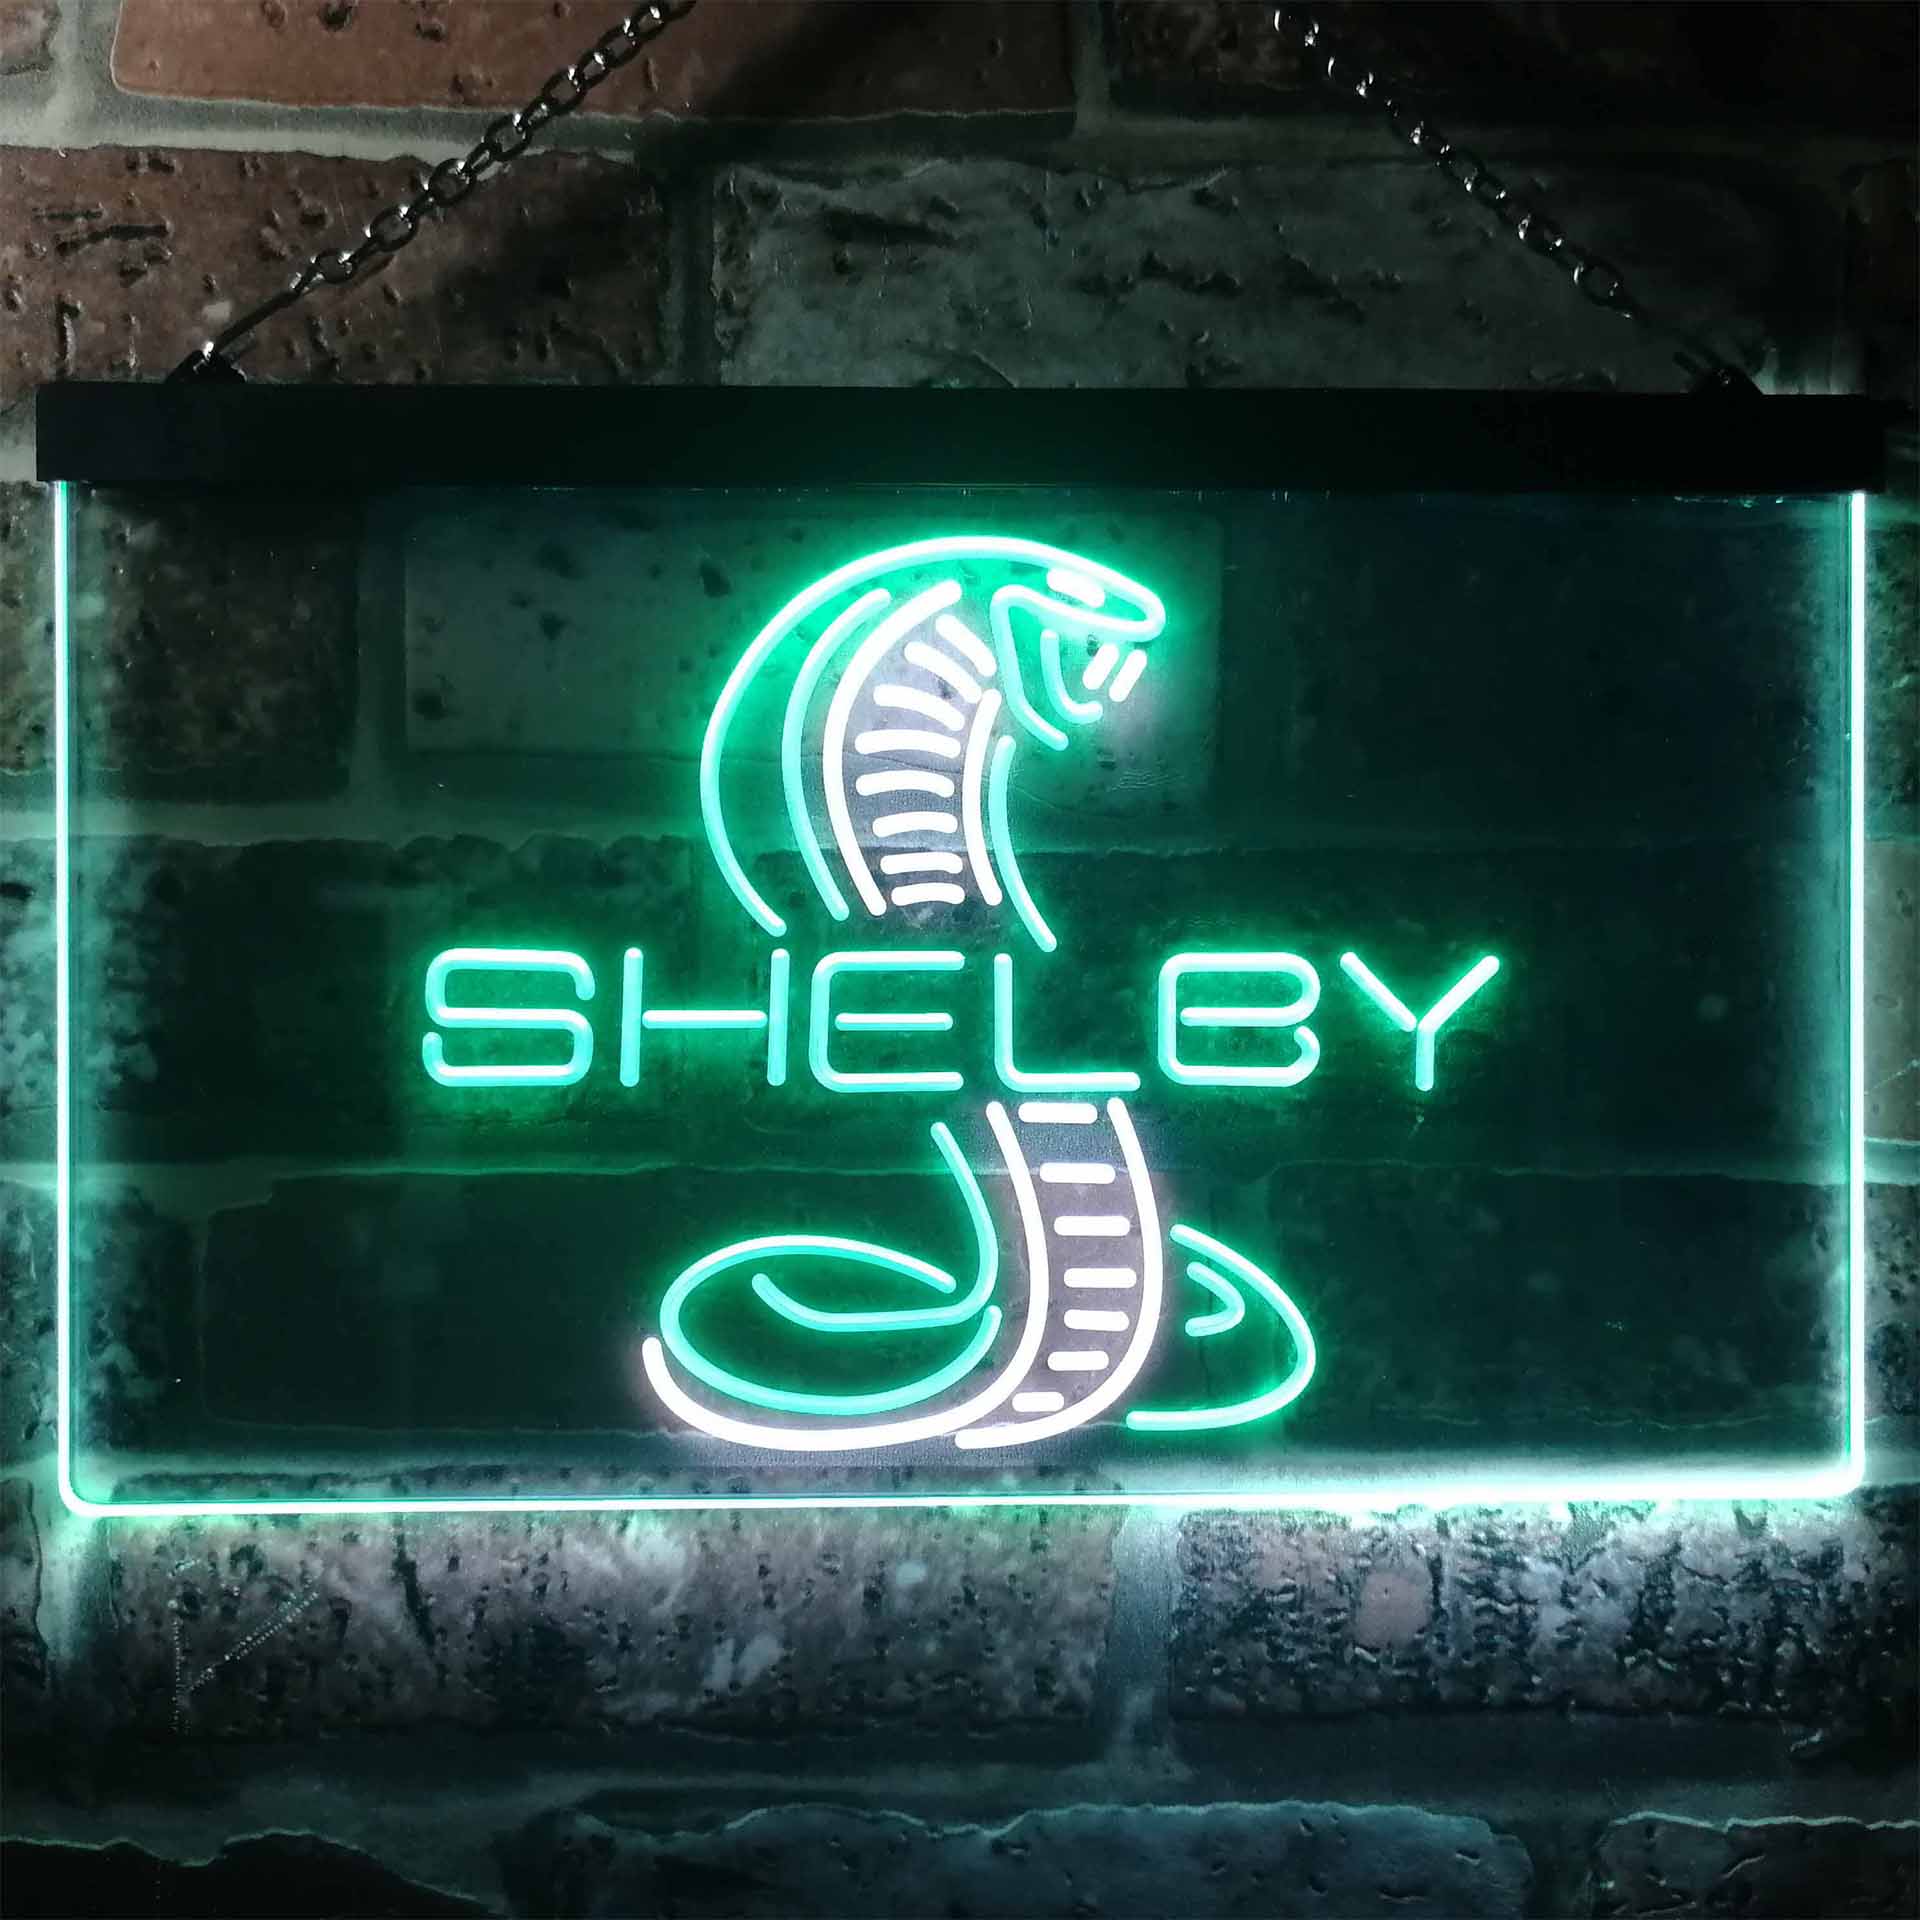 Ford Shelby Car LED Neon Sign